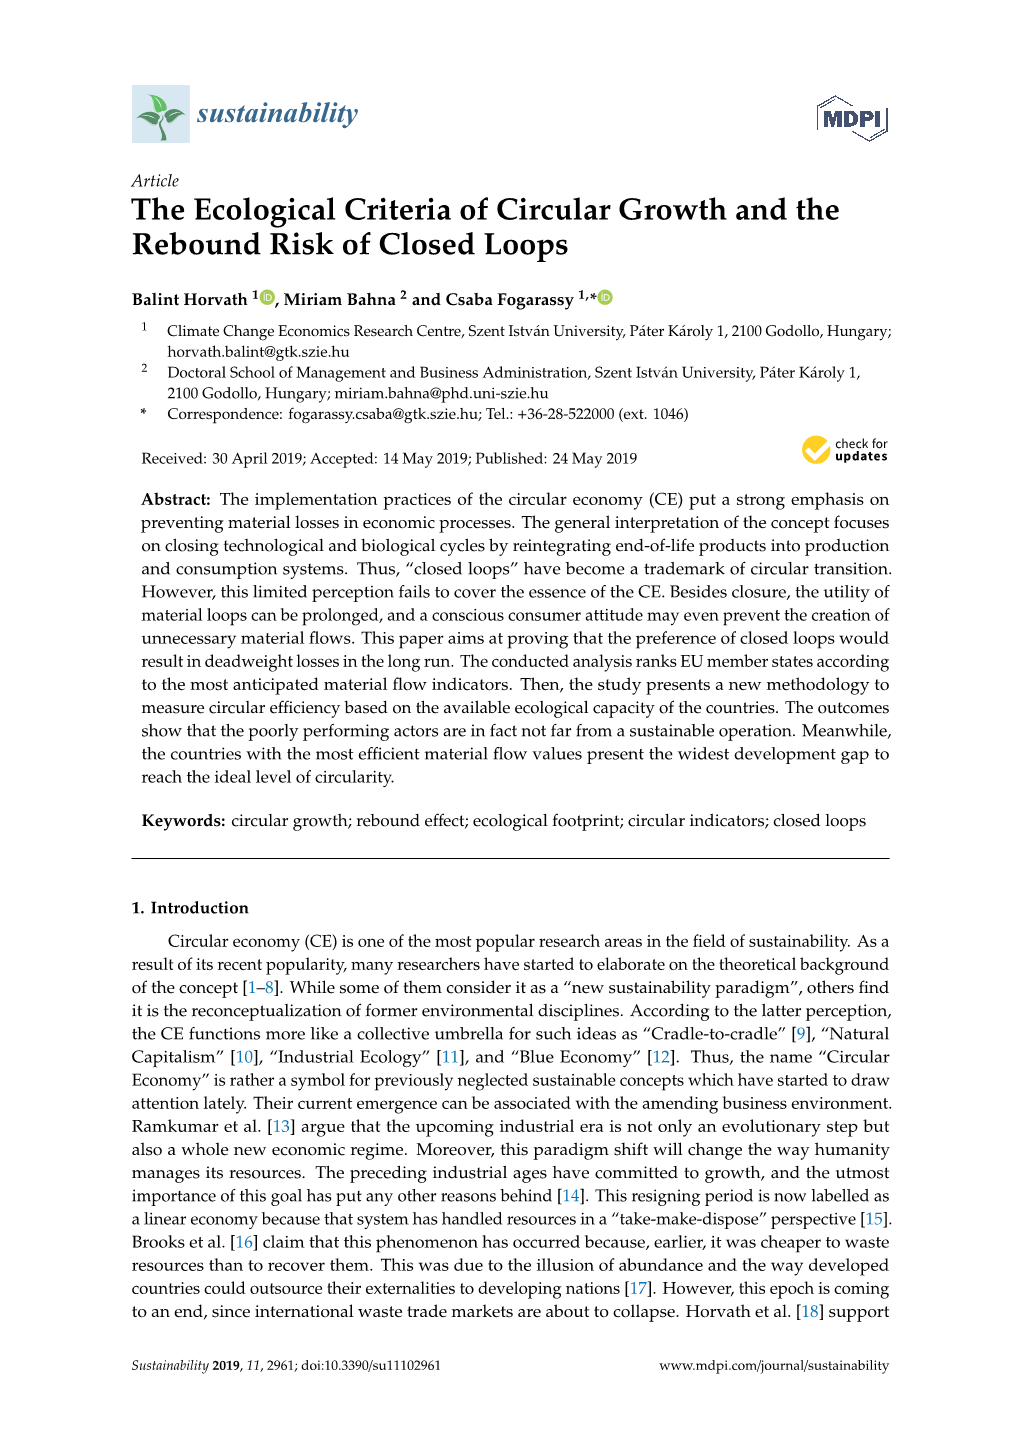 The Ecological Criteria of Circular Growth and the Rebound Risk of Closed Loops